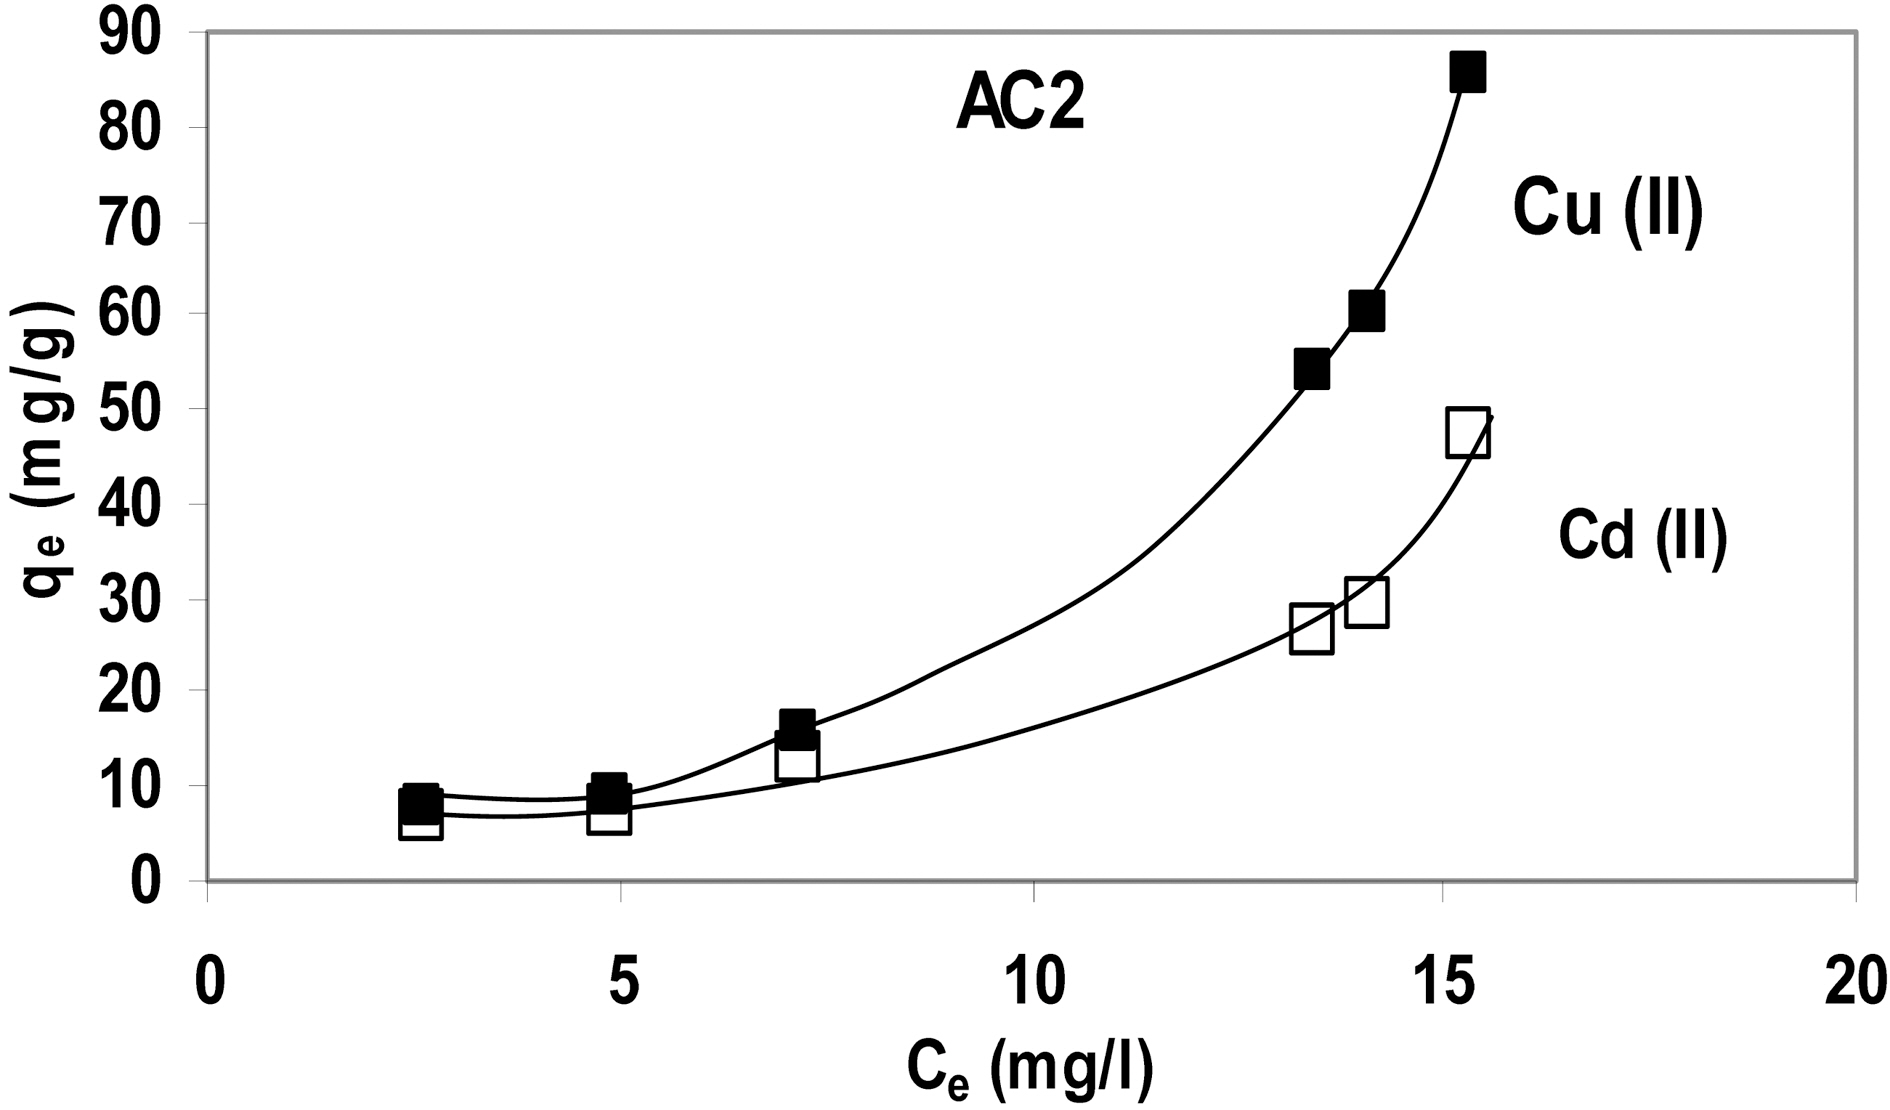 Adsorption isotherms of Cu (II) and Cd (II) ions onto AC2.